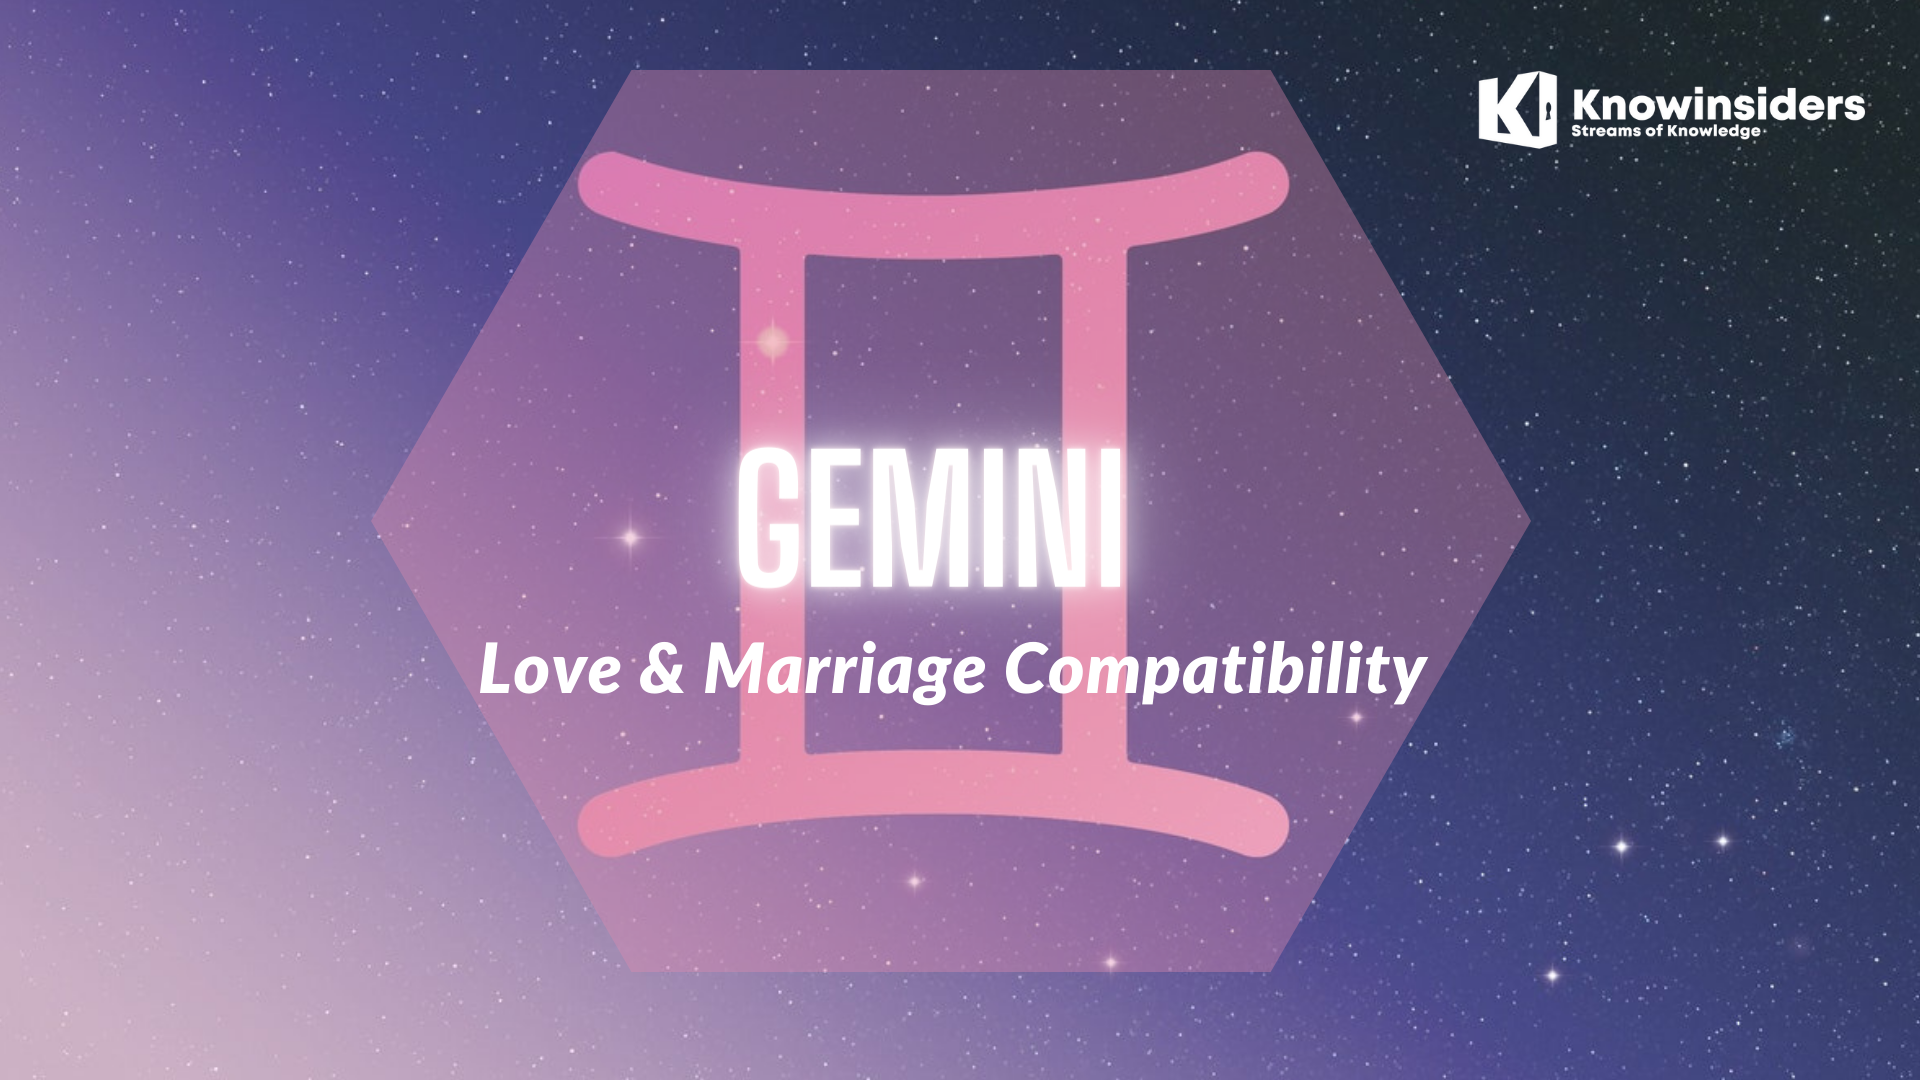 GEMINI - Top 3 Most Compatible Zodiac Signs for Love & Marriage